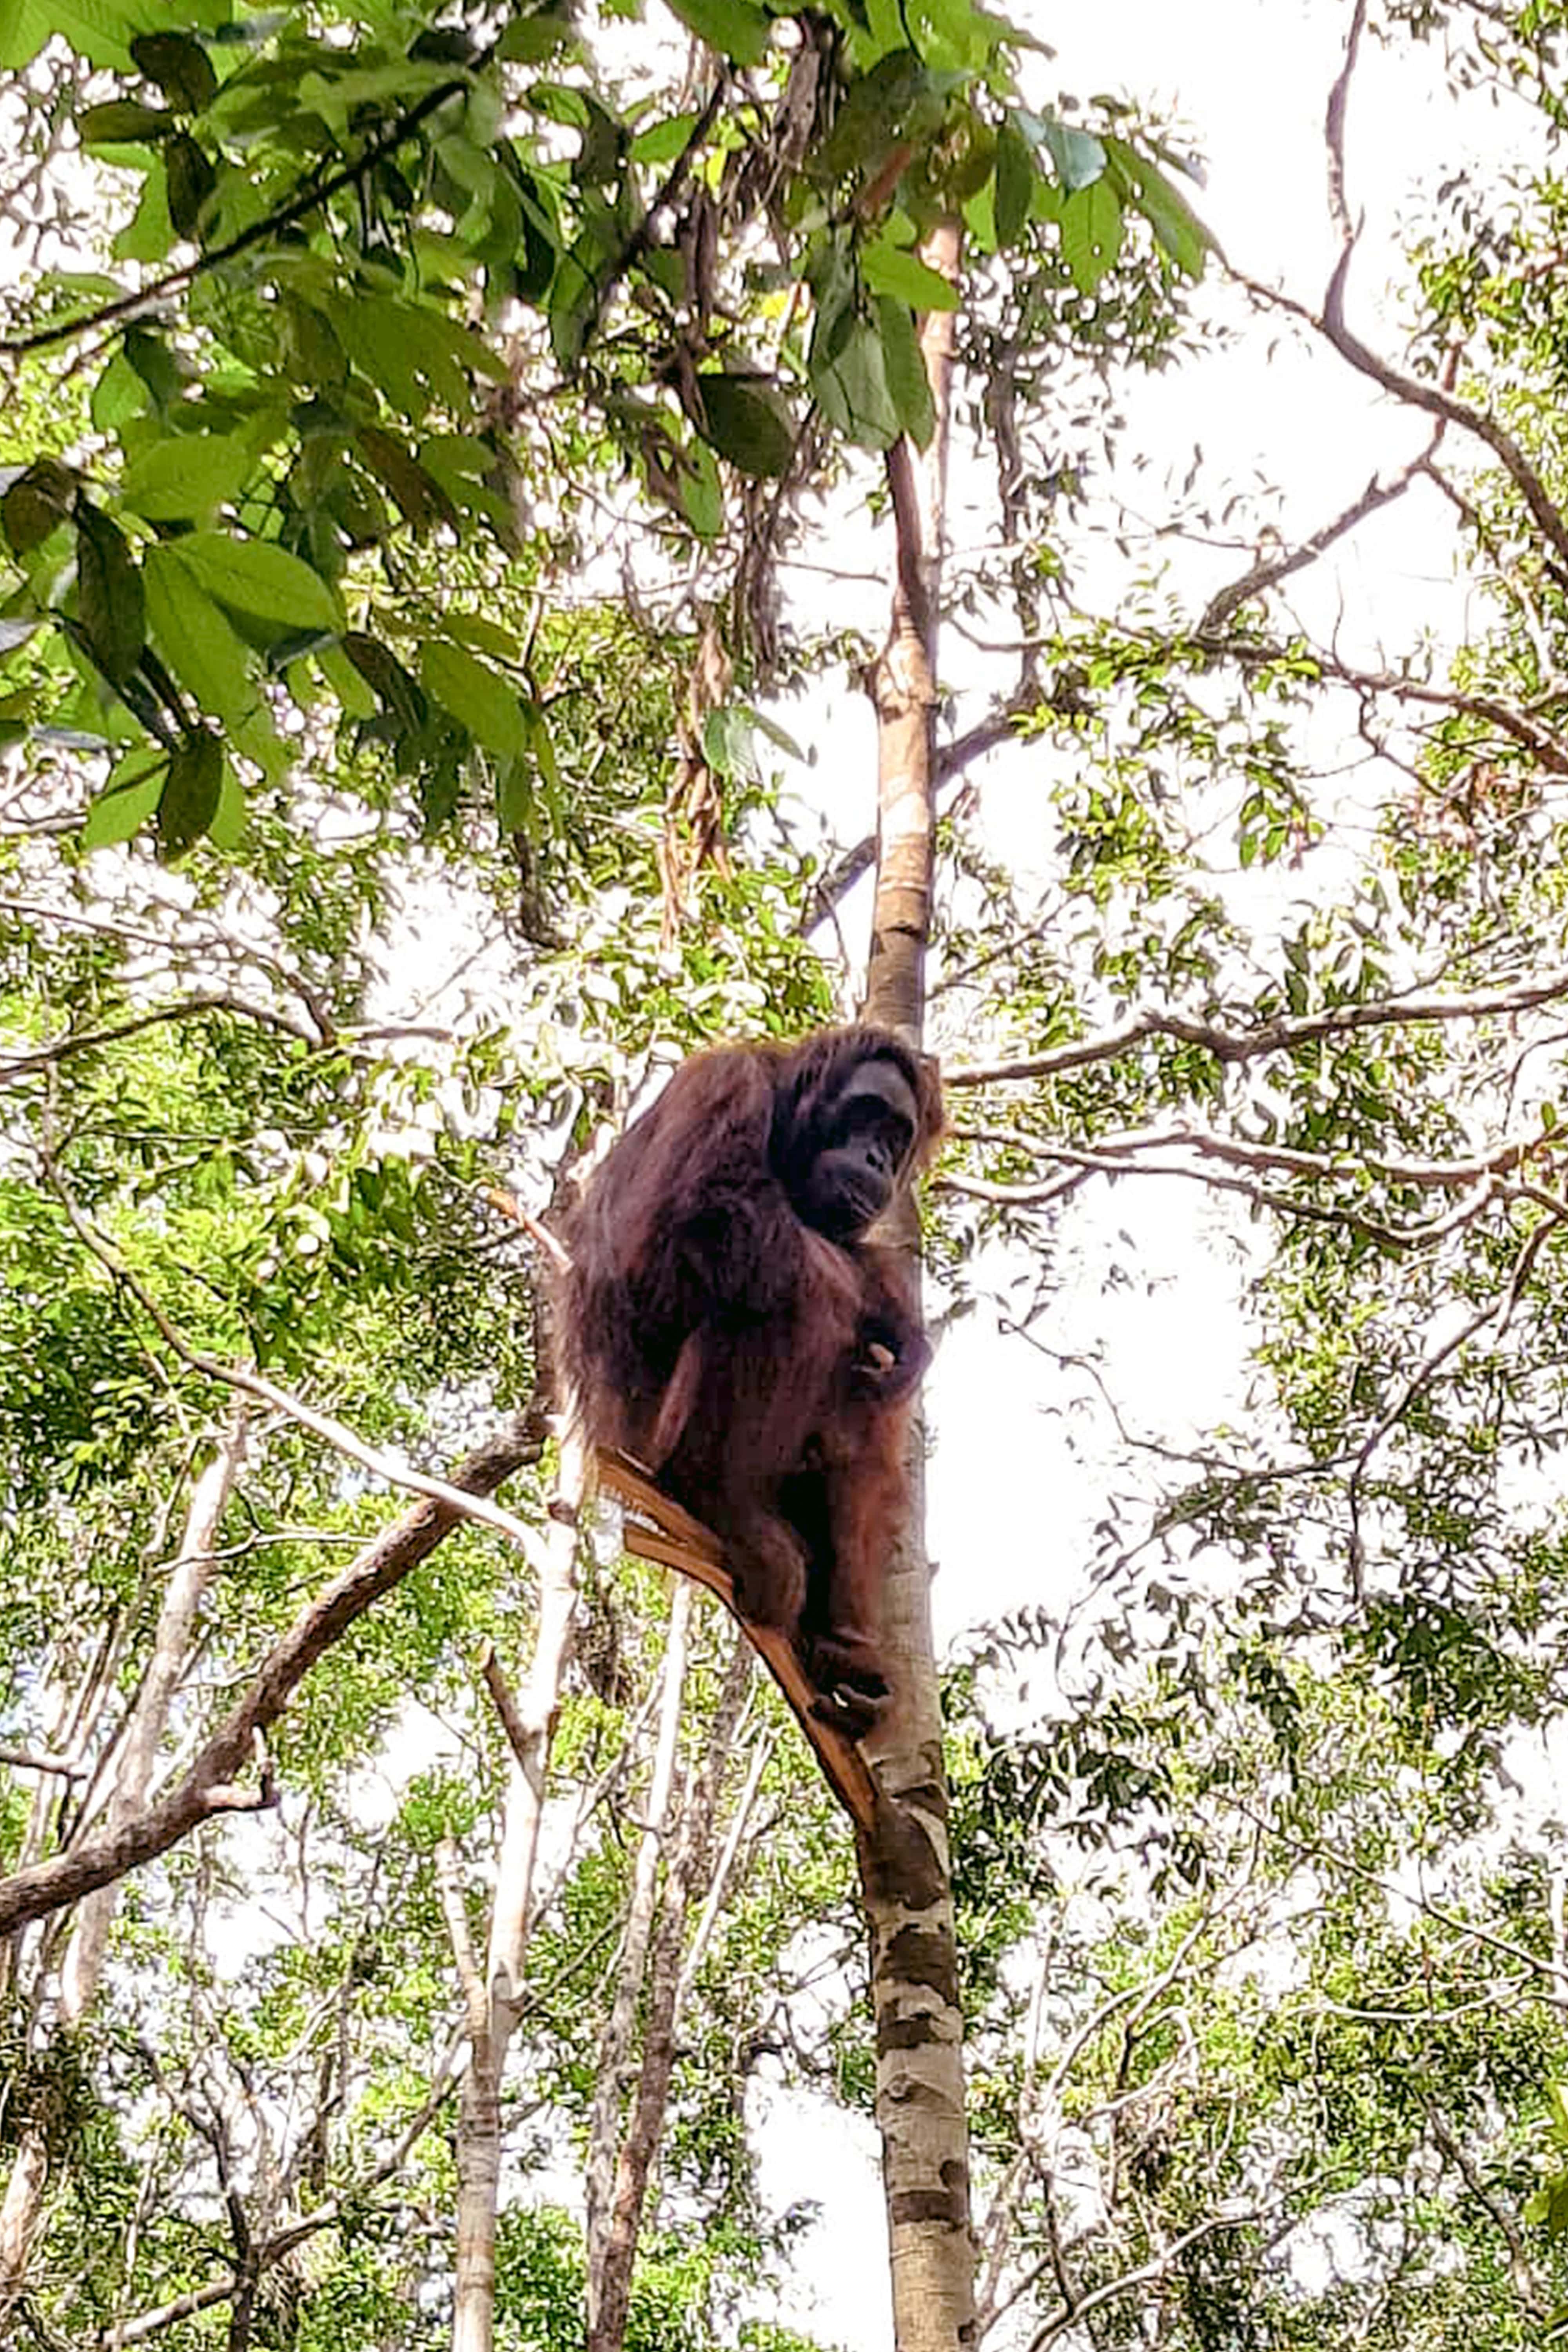  Wild Orangutan  Tours What To Know And Expect 